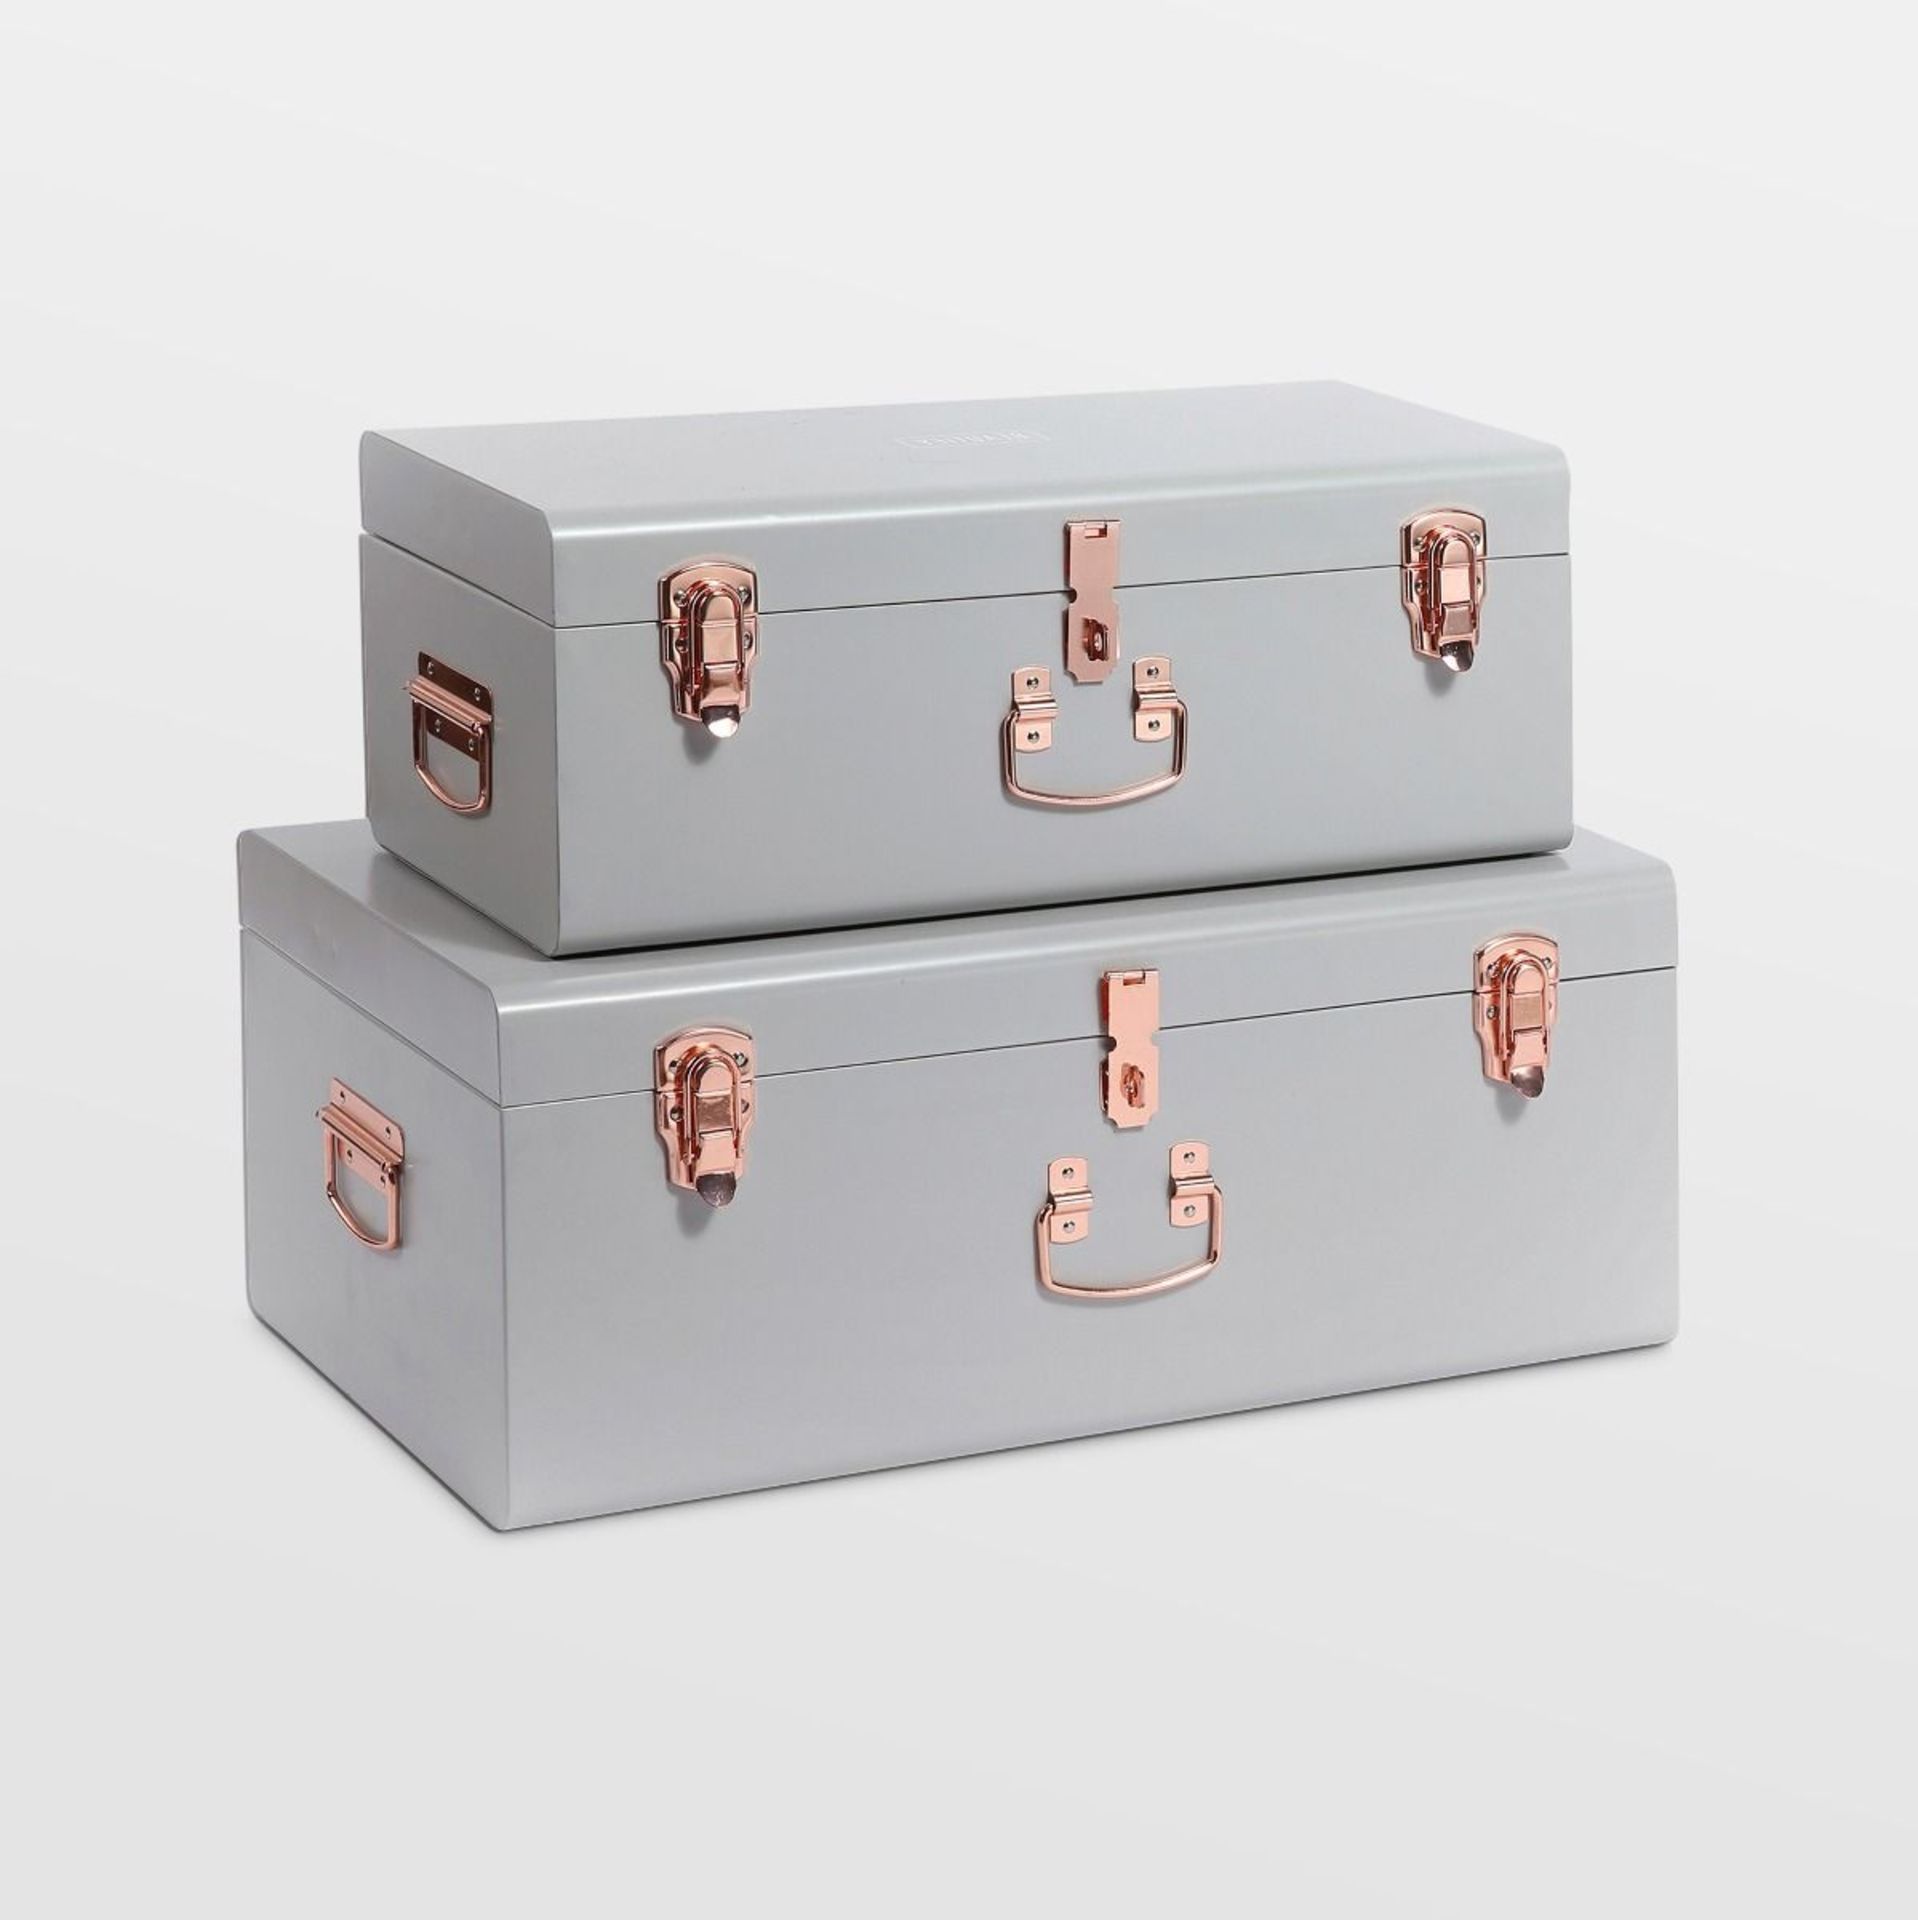 Grey Storage Trunks - Set of 2. - R8. Tidy up you home in style with the Beautify Set of 2 Grey